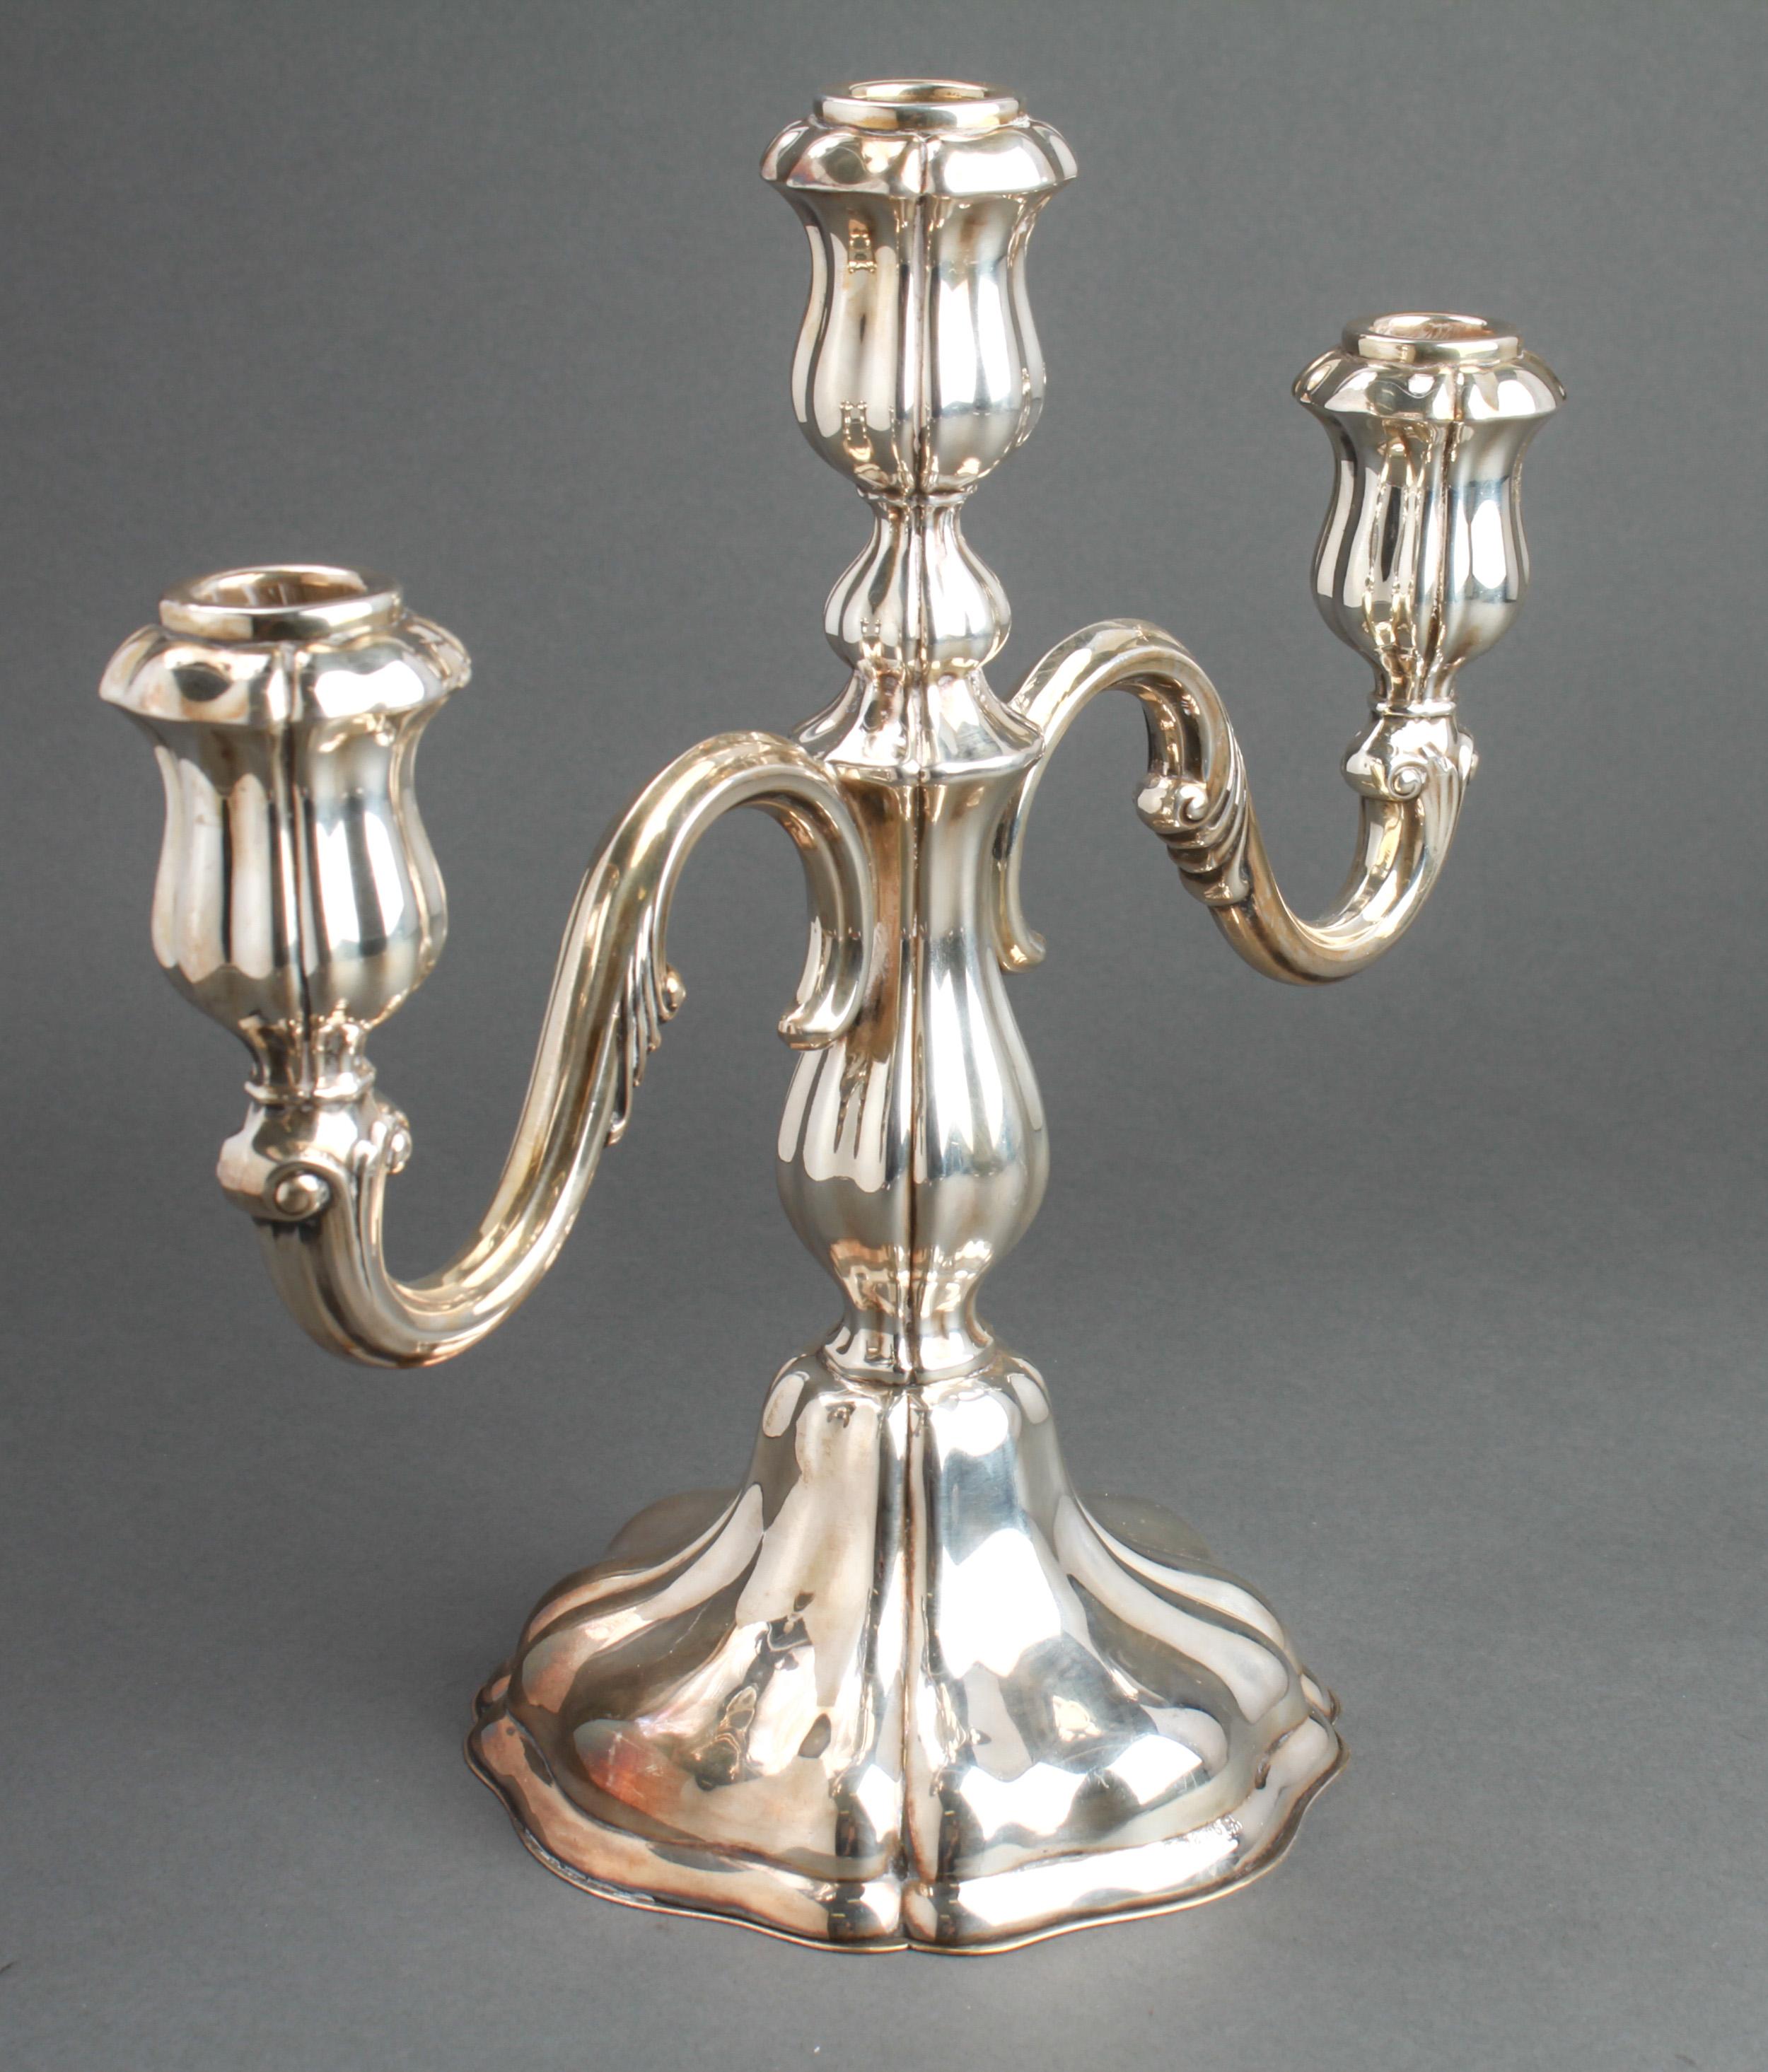 Continental silver three candleholder candelabra with a German hallmark and marked 